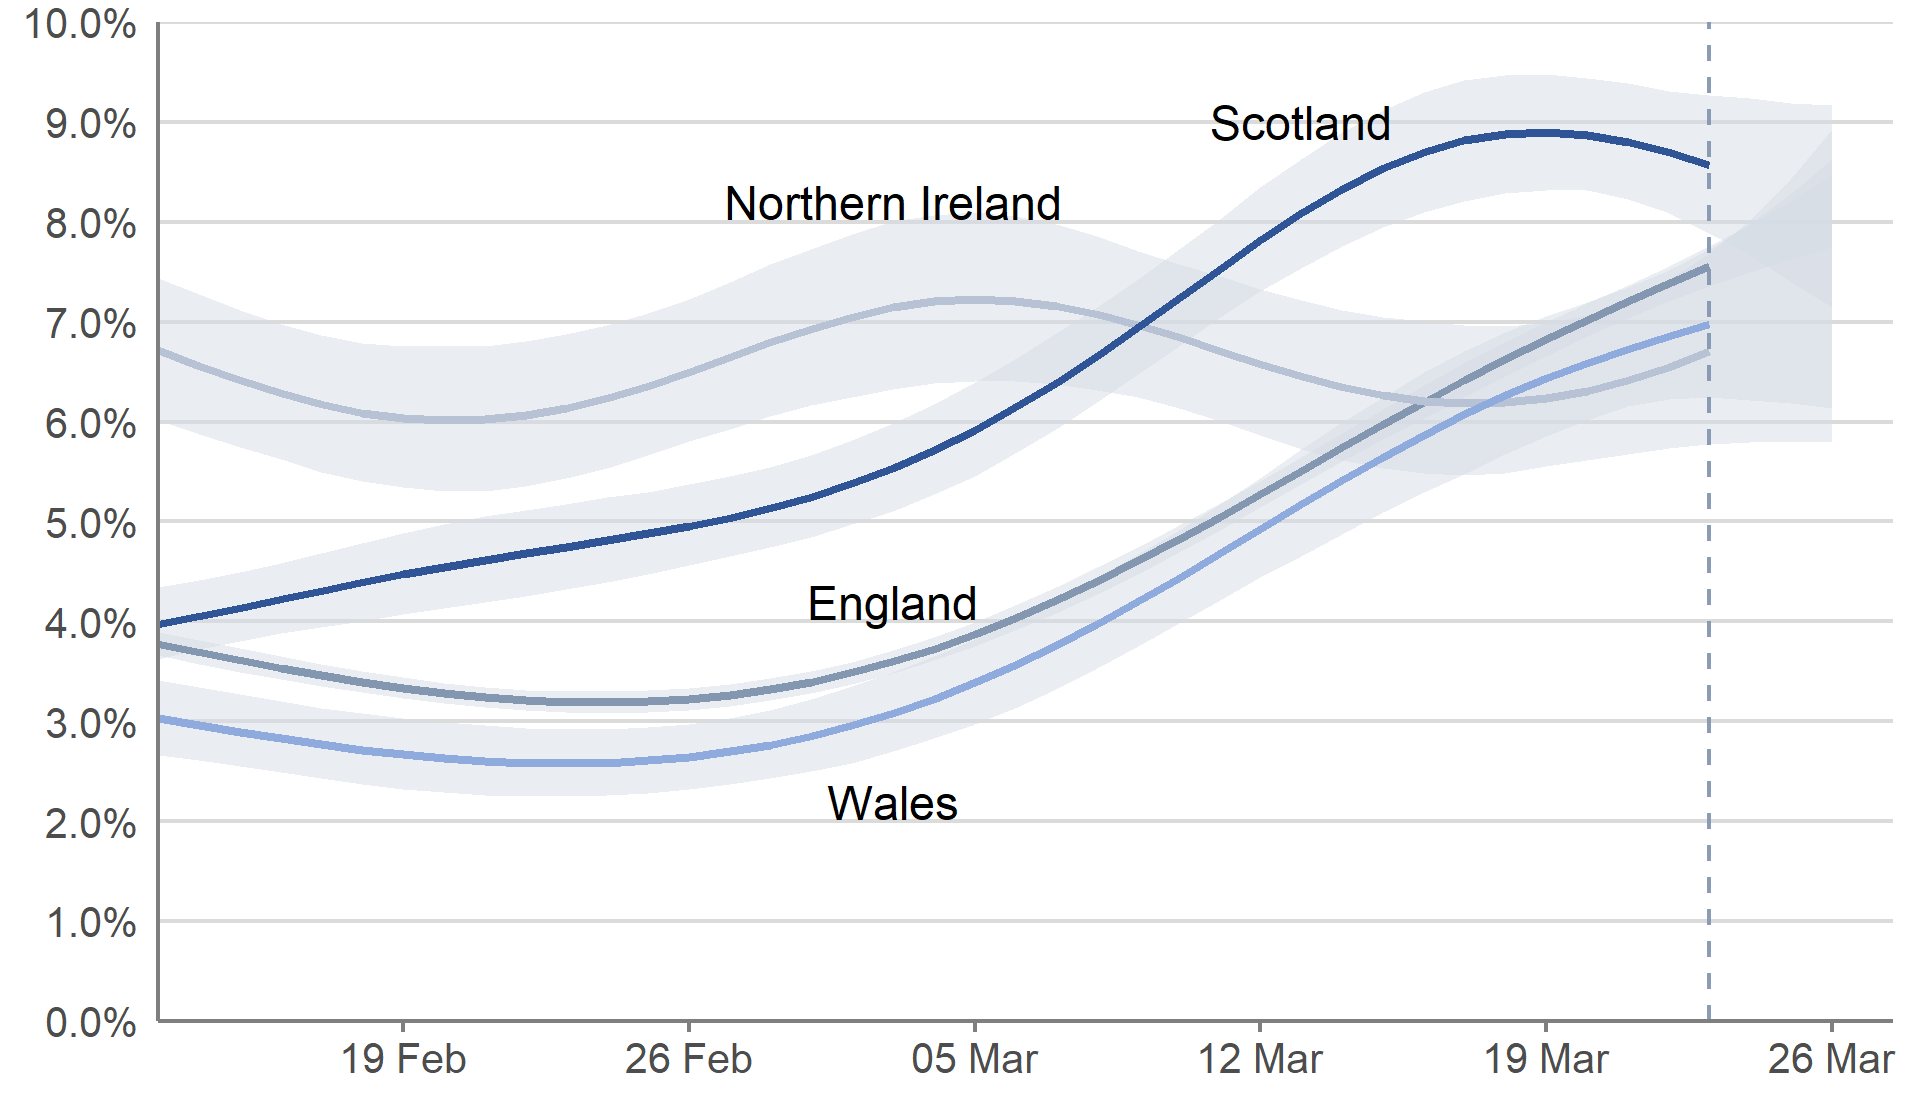 In England and Wales, the estimated percentage of people testing positive continued to increase in the most recent week (20 to 26 March 2022). In Scotland, the percentage of people testing positive has increased over the most recent two weeks, but the trend is uncertain in the most recent week. In Northern Ireland, the trend in the percentage of people testing positive is uncertain in the most recent week to 26 March 2022.